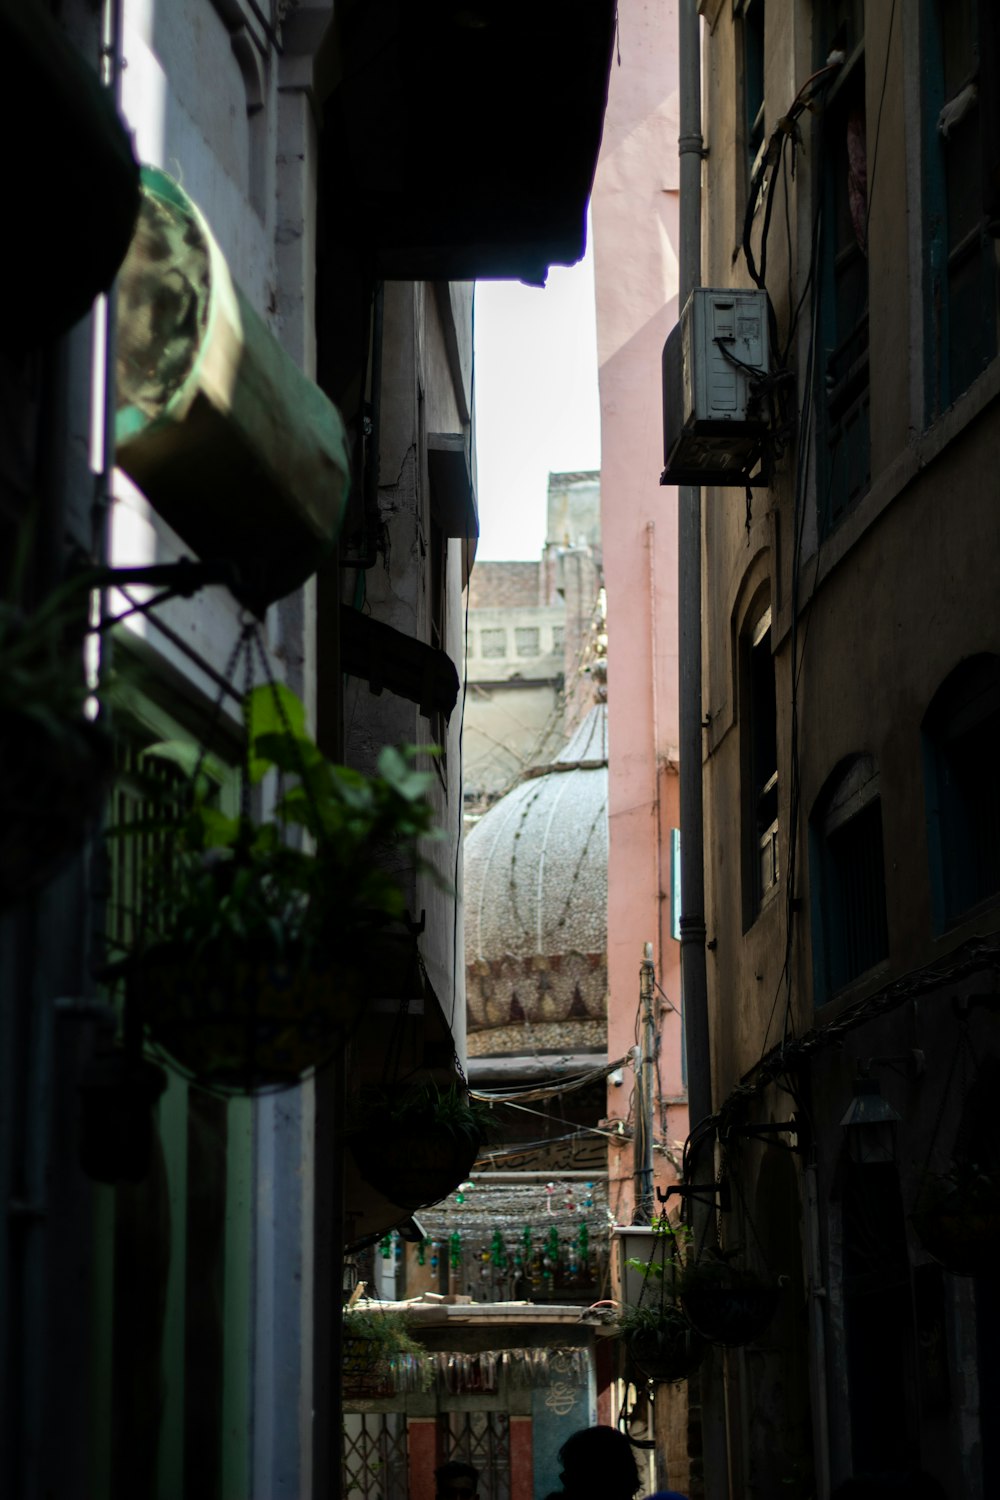 a narrow alley way with a person walking down it